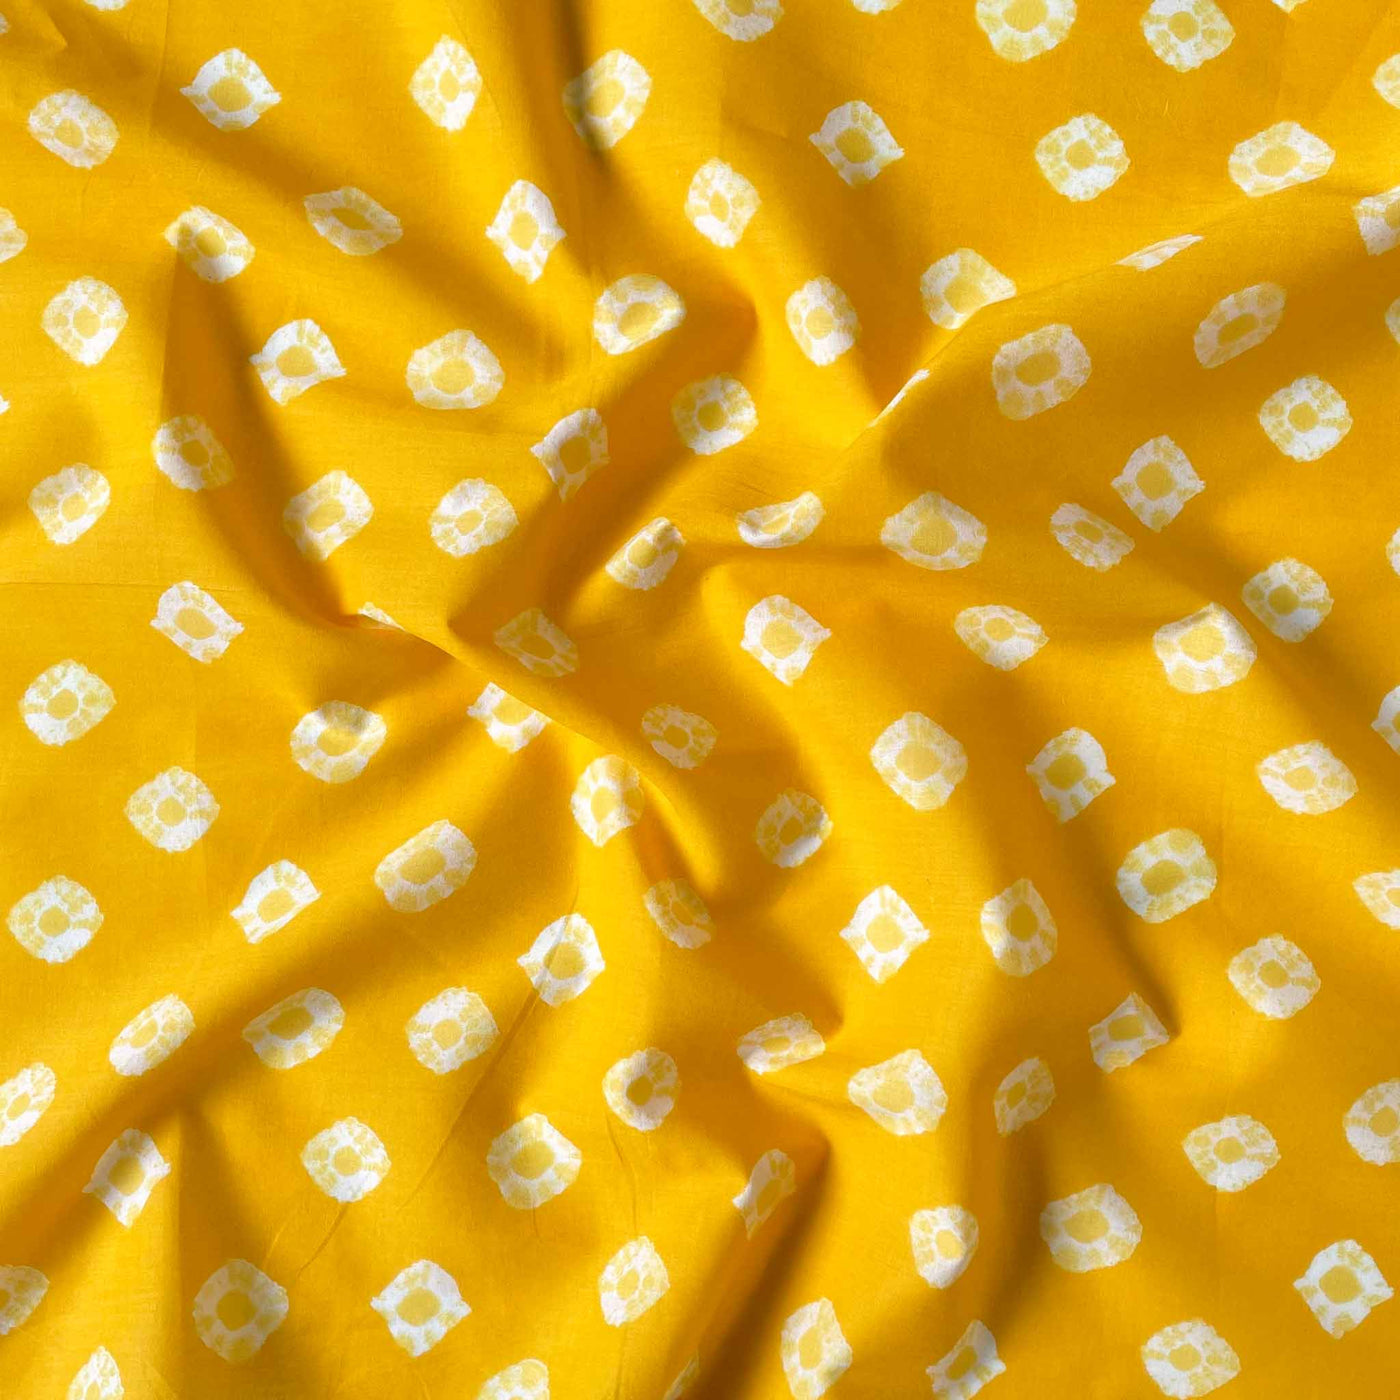 Fabric Pandit Cut Piece (CUT PIECE) Happy Yellow Batik Natural Dyed Diamond Rings Hand Block Printed Pure Cotton Fabric Width (43 inches)